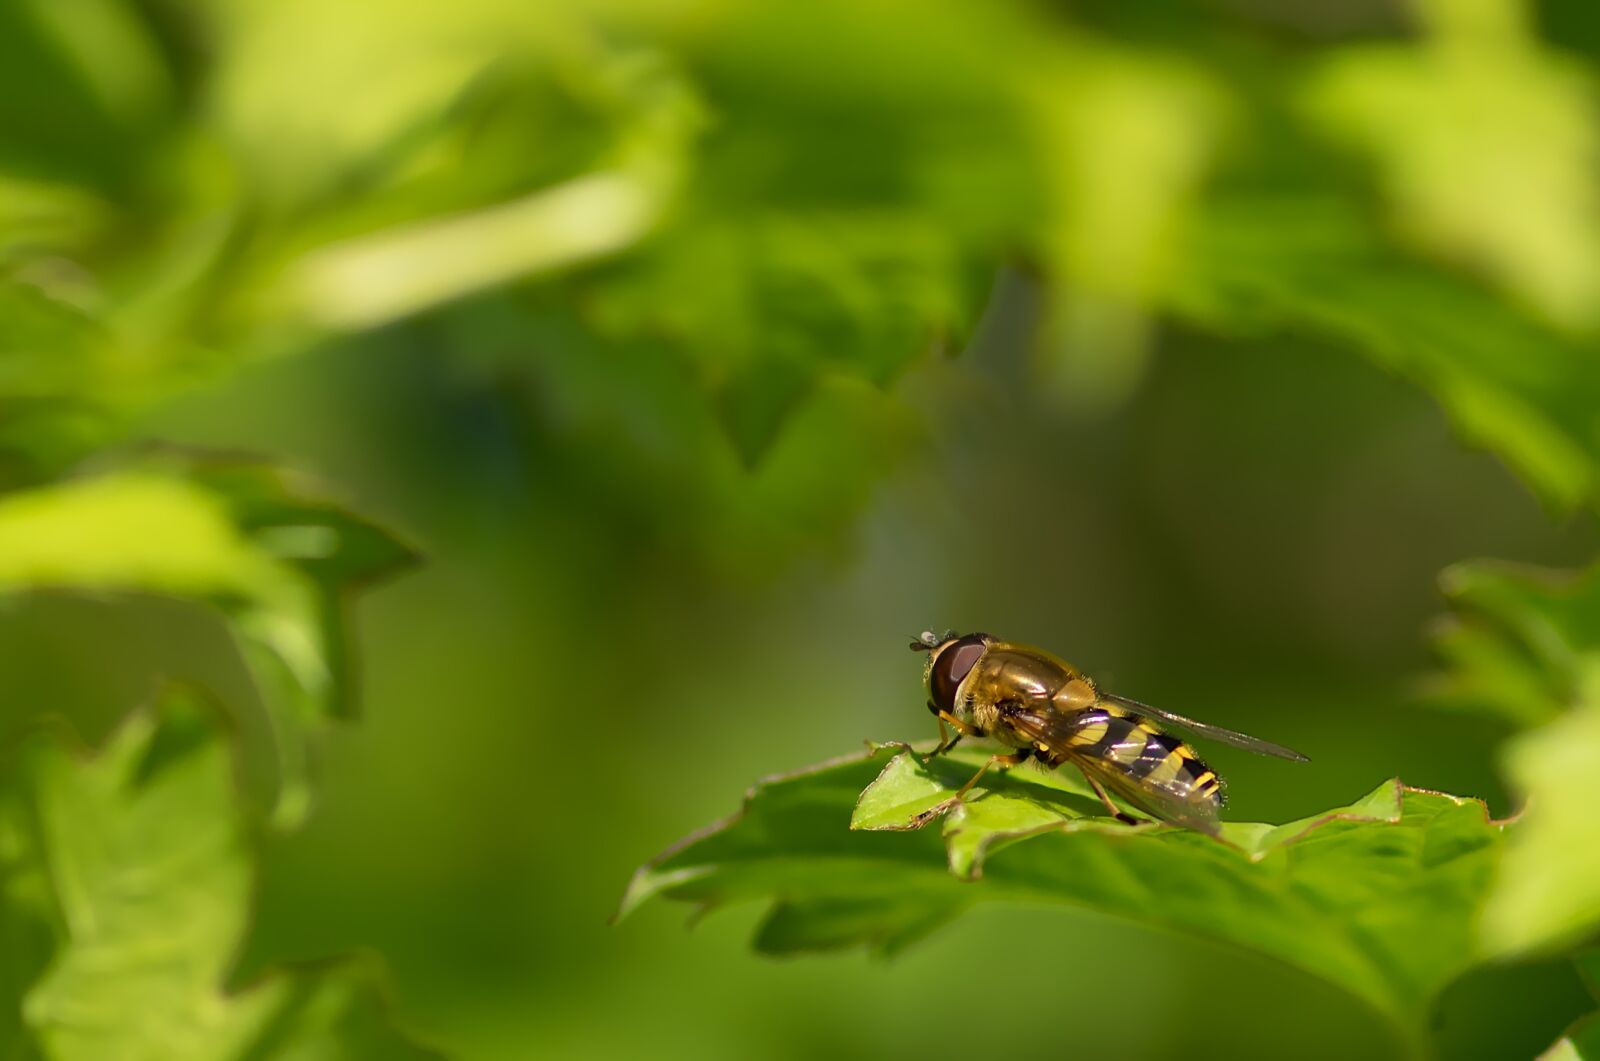 Pentax smc D-FA 100mm F2.8 macro sample photo. Syrphid belted, browser, spring photography